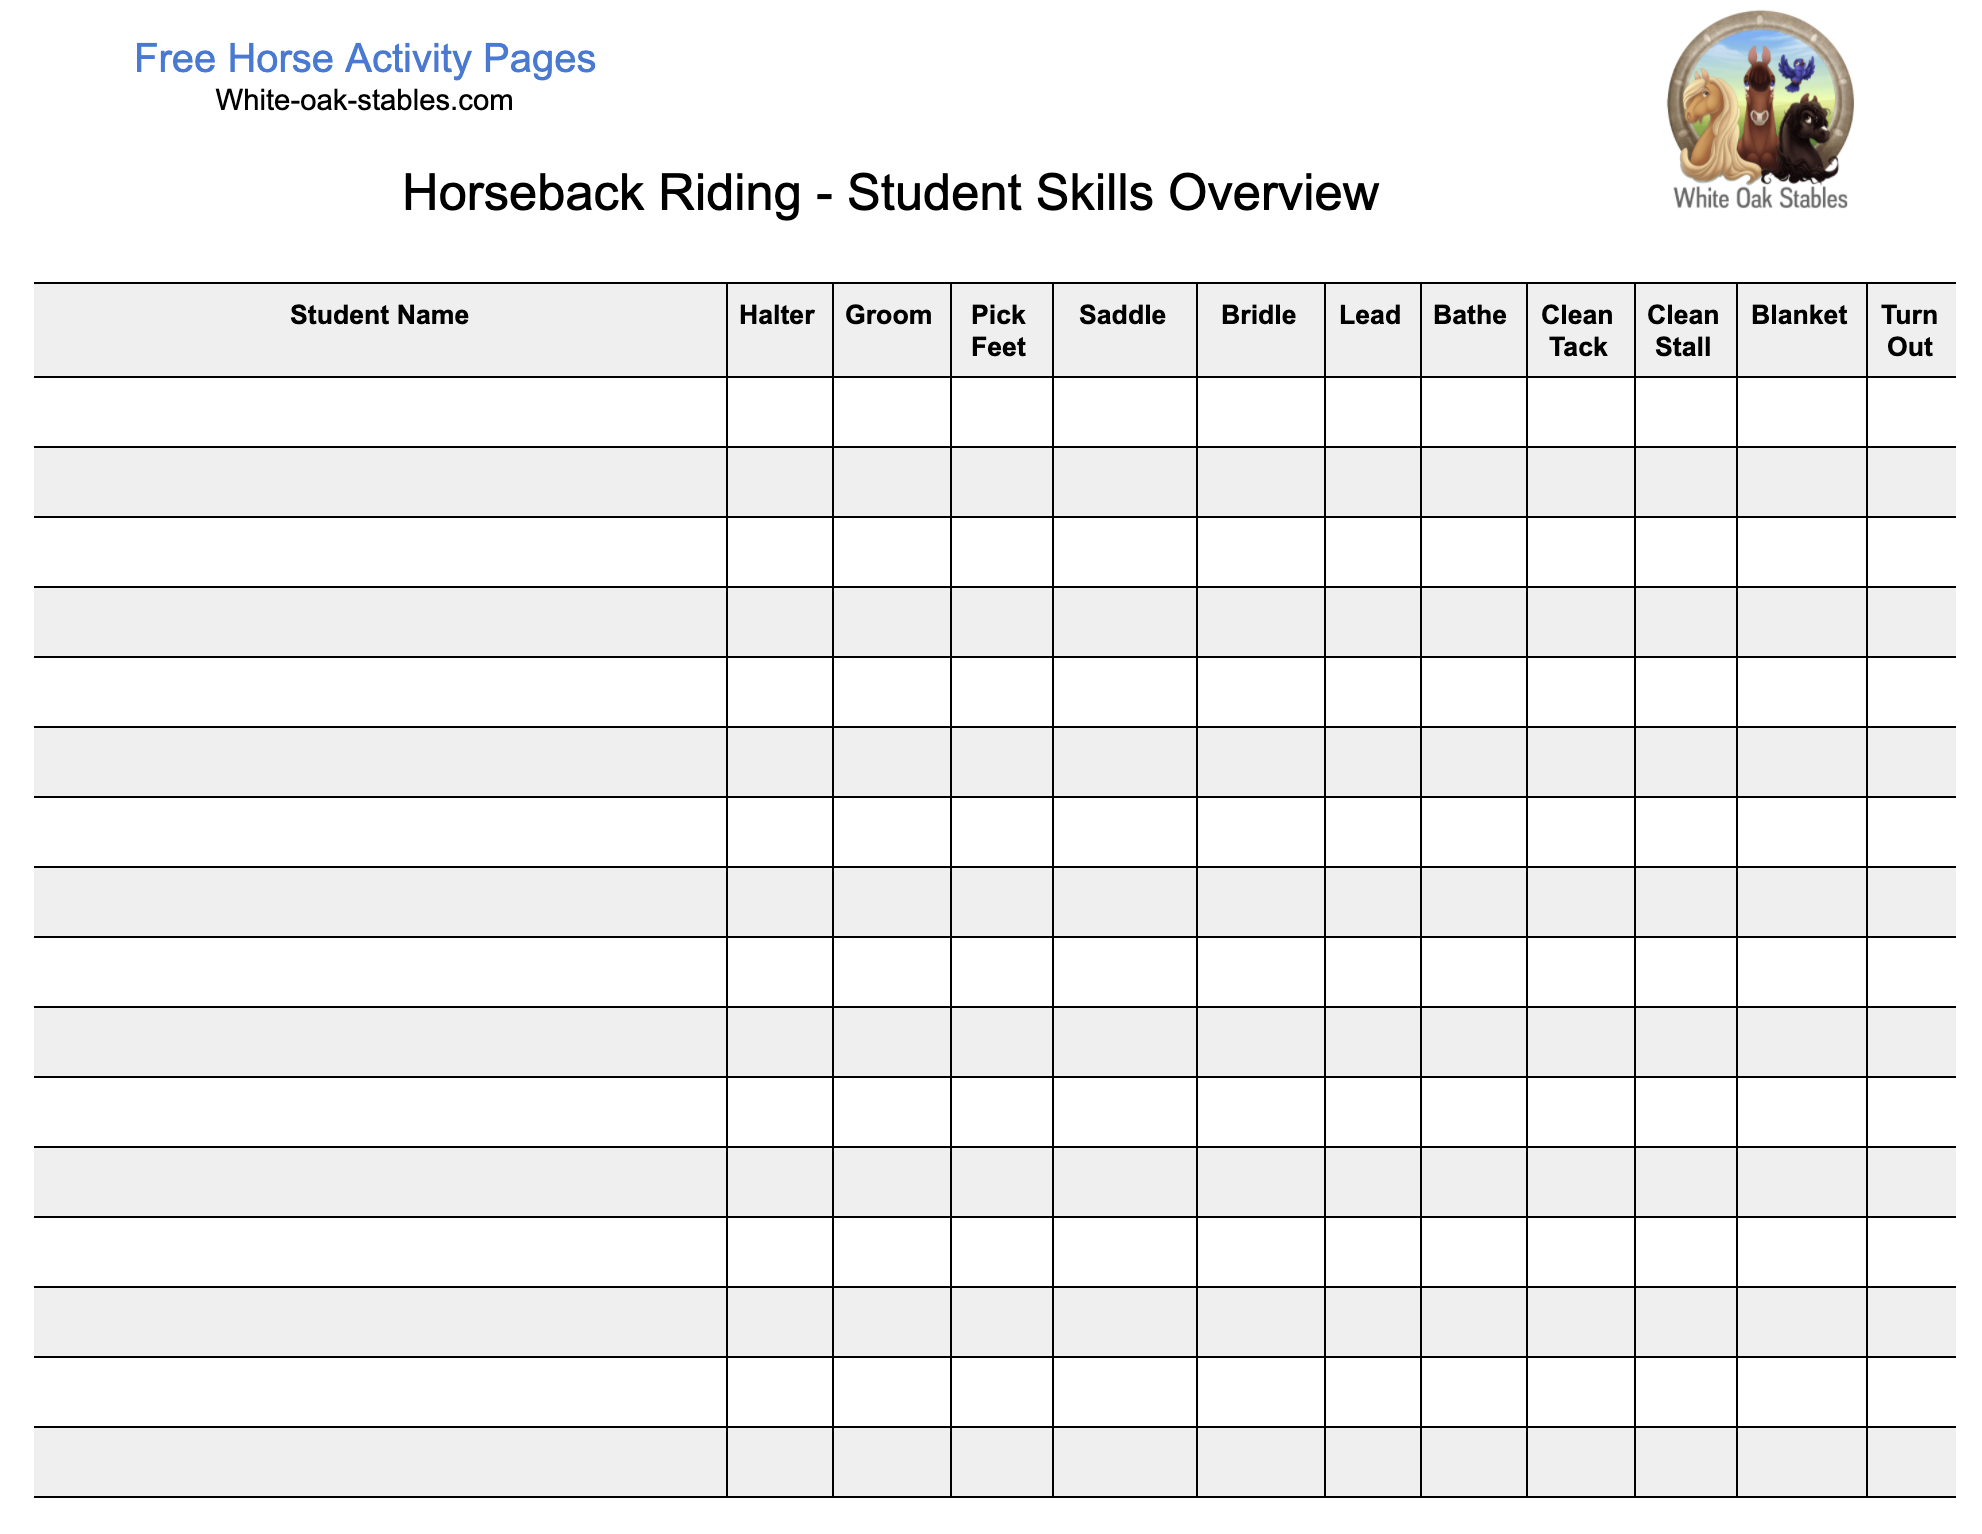 Student Record Overview